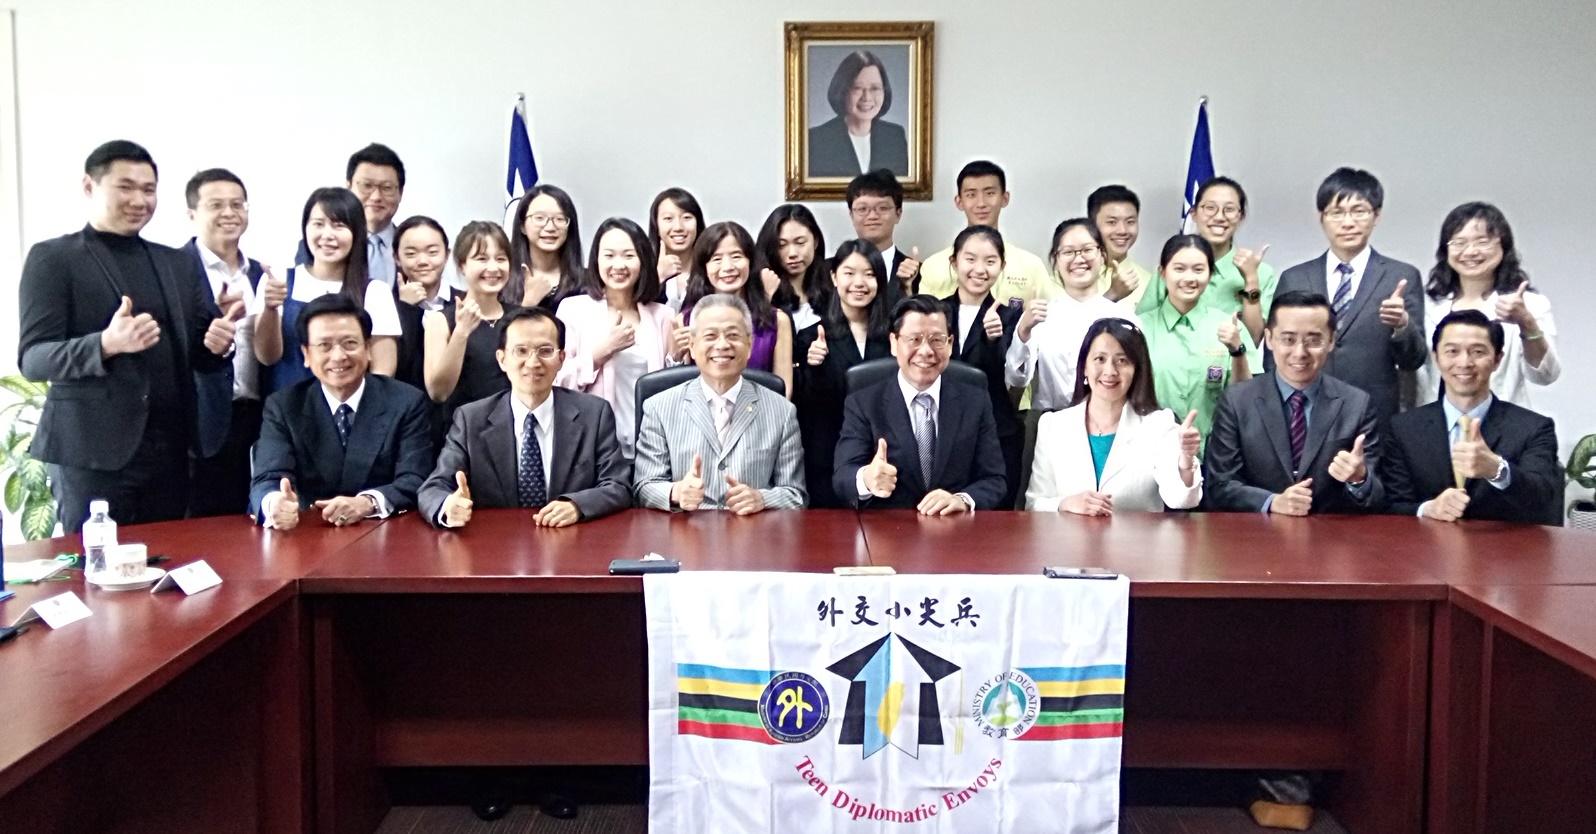 Representative Francis Liang (first row, center) hosted the 16th R.O.C Delegation of Teen Diplomatic Envoys meeting with Taiwan compatriots and members of the Taipei Business Association in Singapore. (8 February 2018)